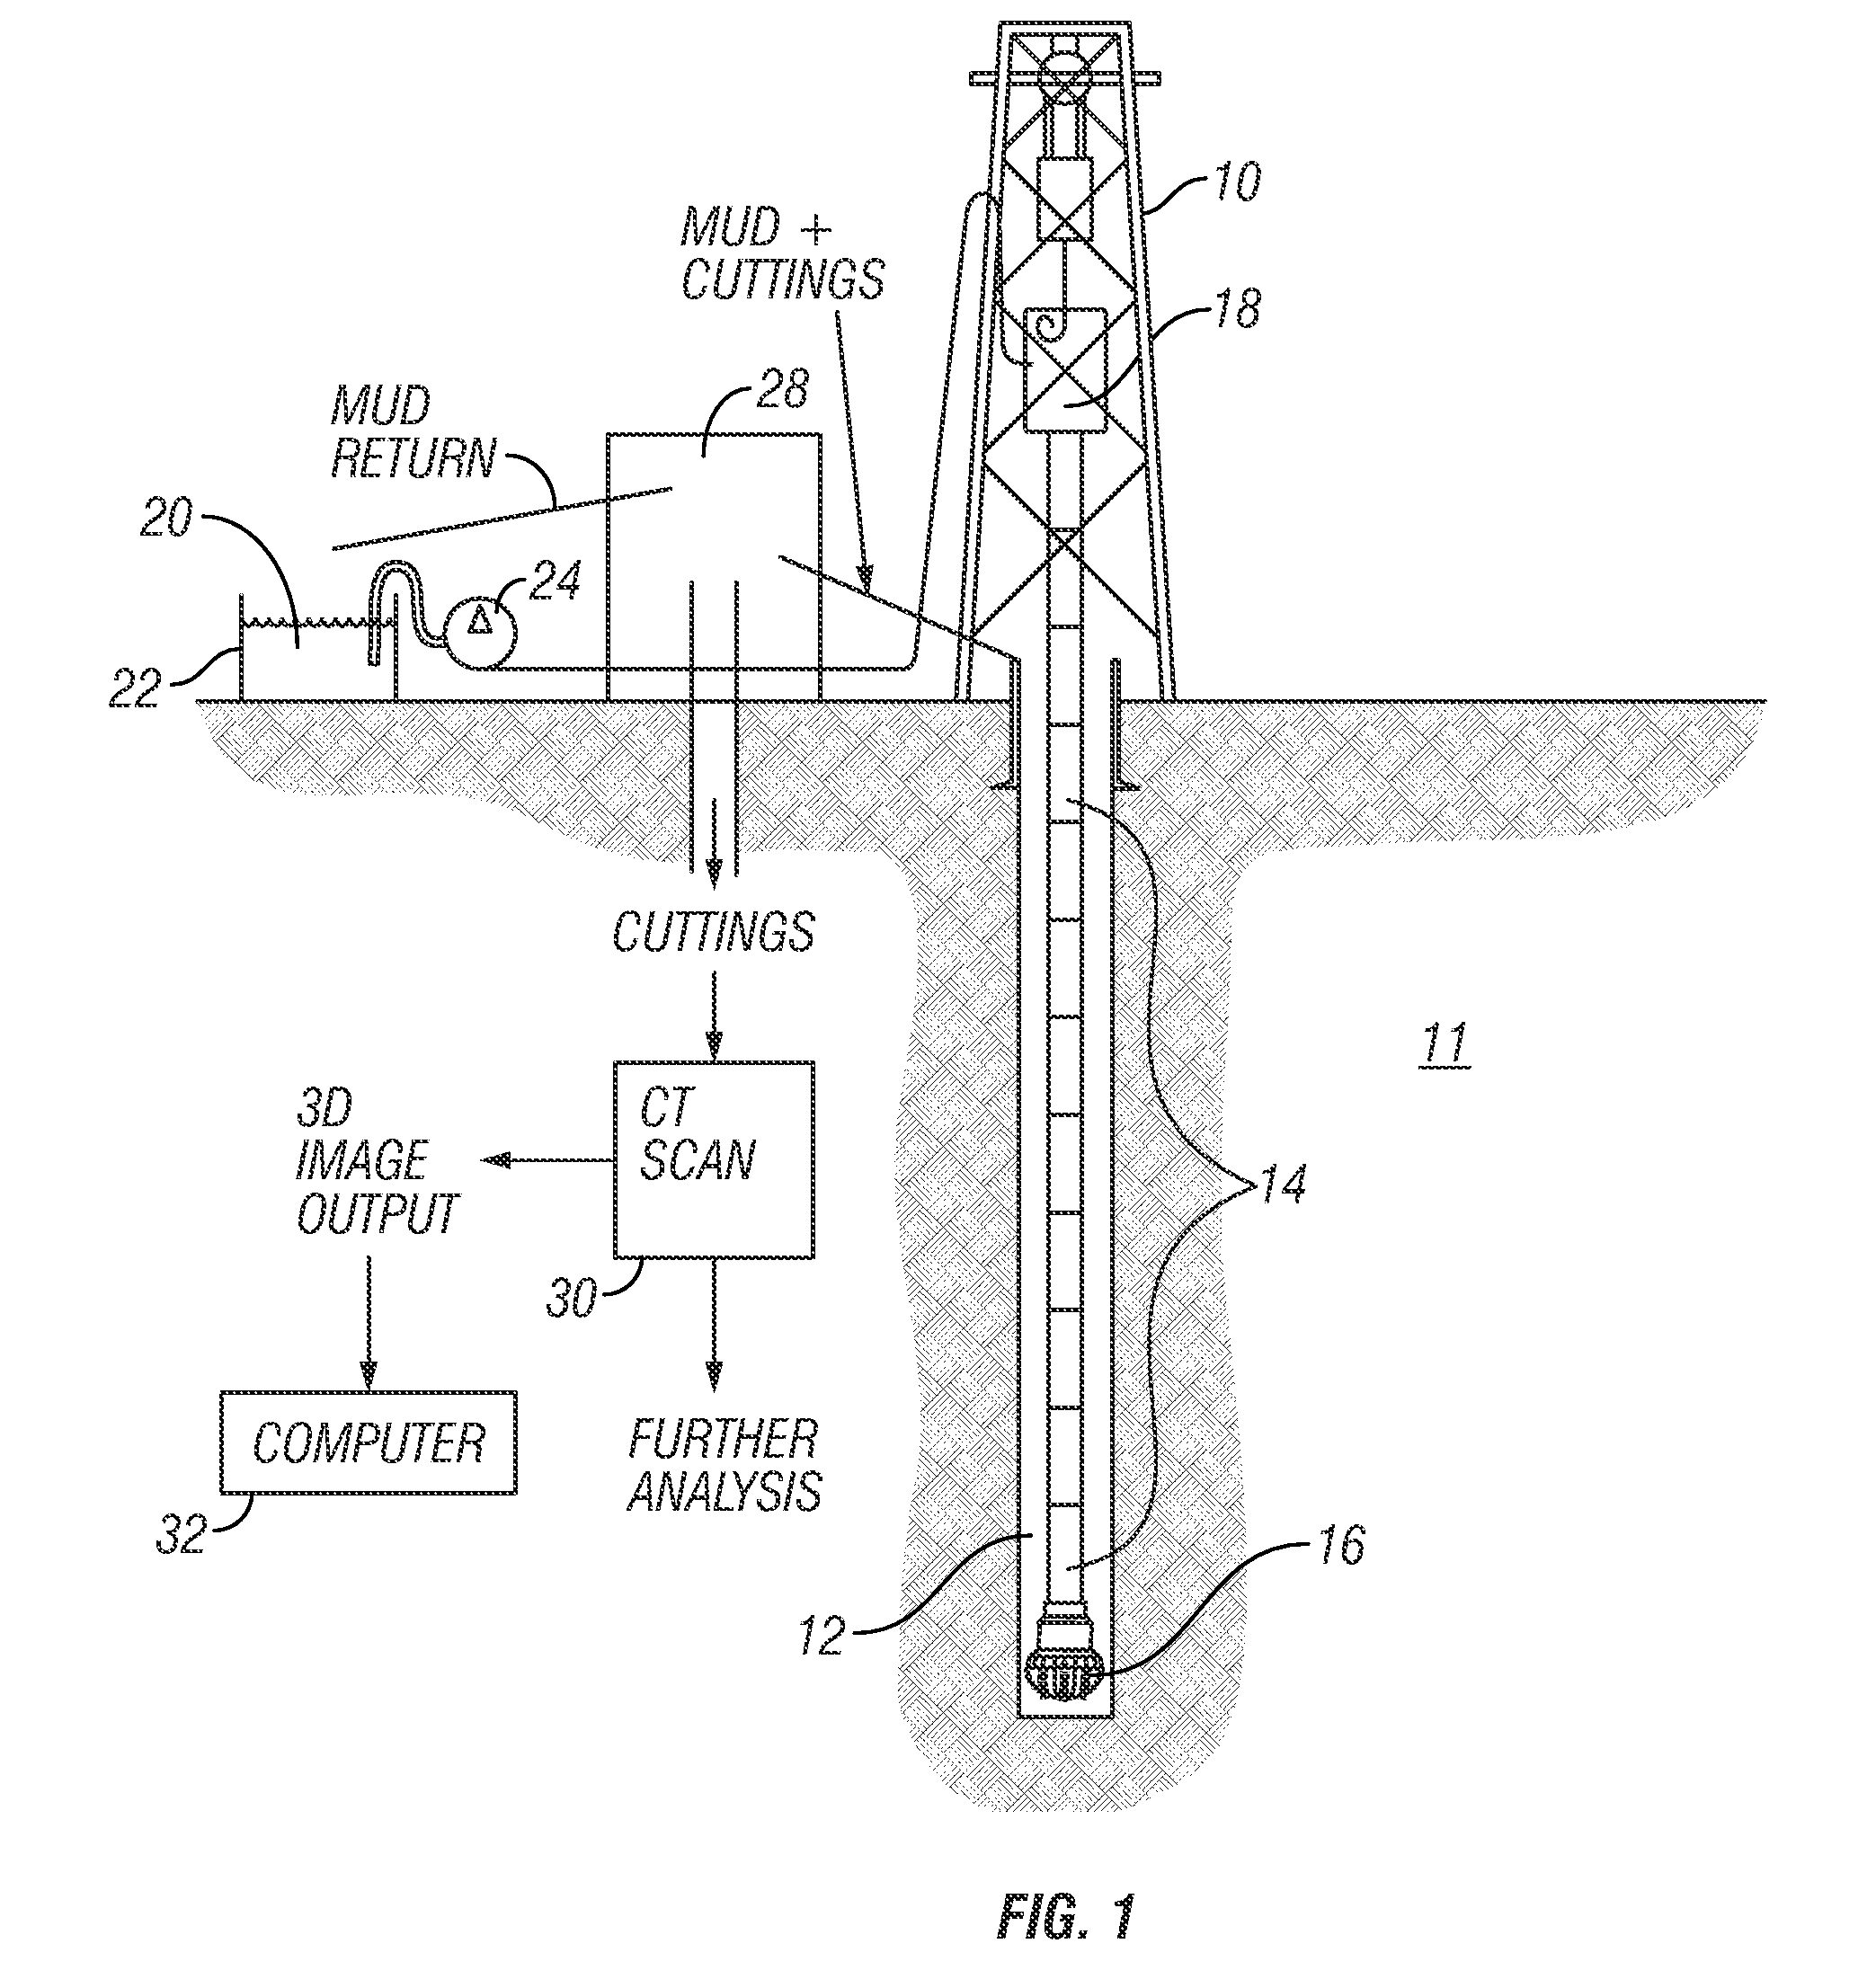 Method for determining properties of fractured rock formations using computer tomograpic images thereof